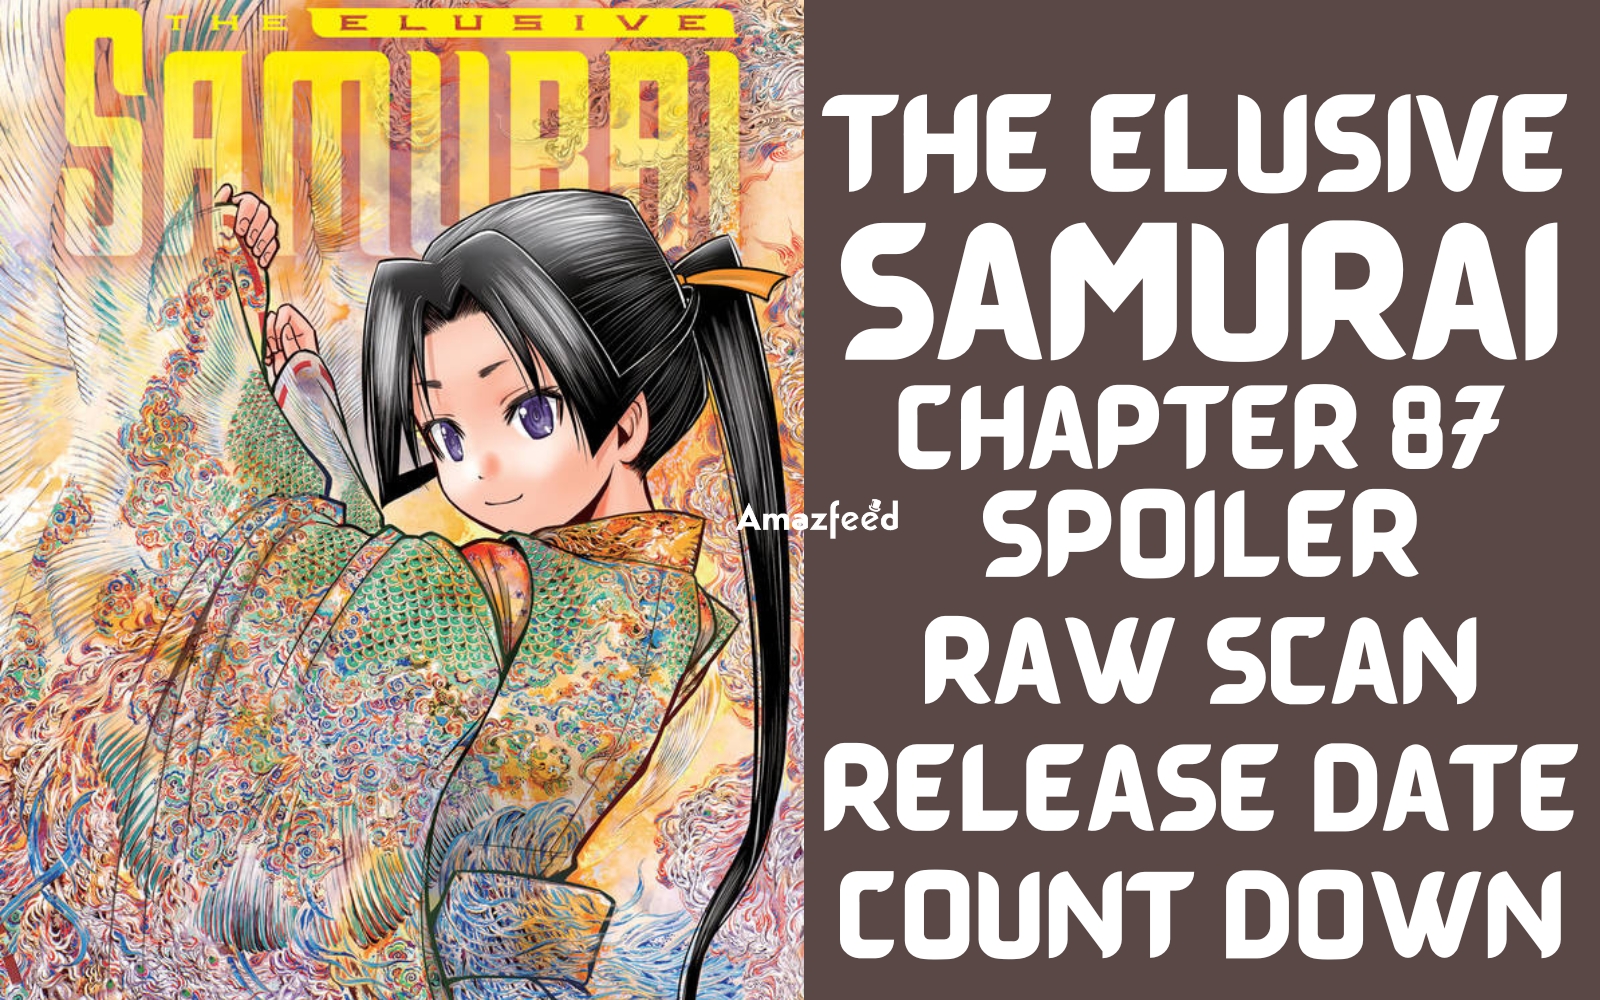 Mashle chapter 154: Release date and time, countdown, where to read, what  to expect, and more